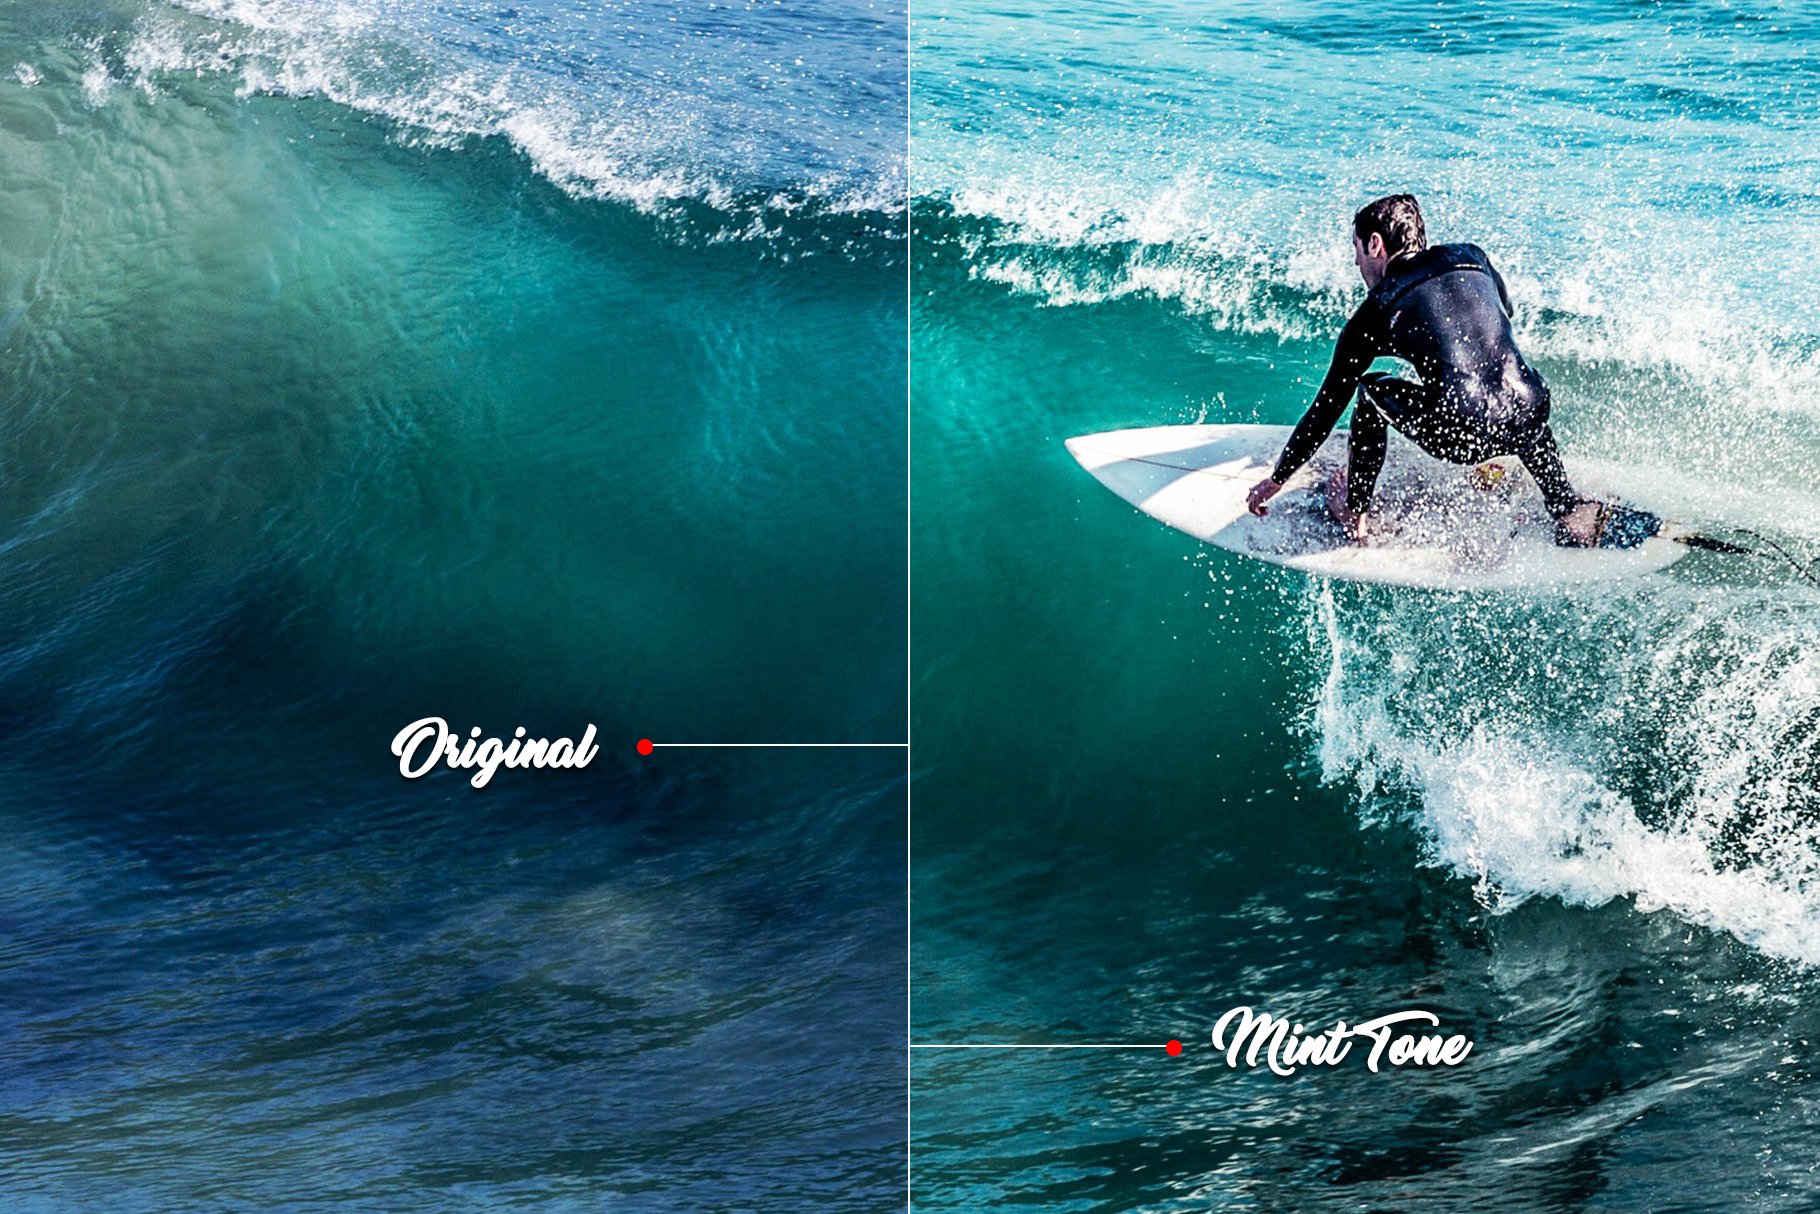 sports lightroom and photoshop presets by pixelspic illustrative image mint tone 232